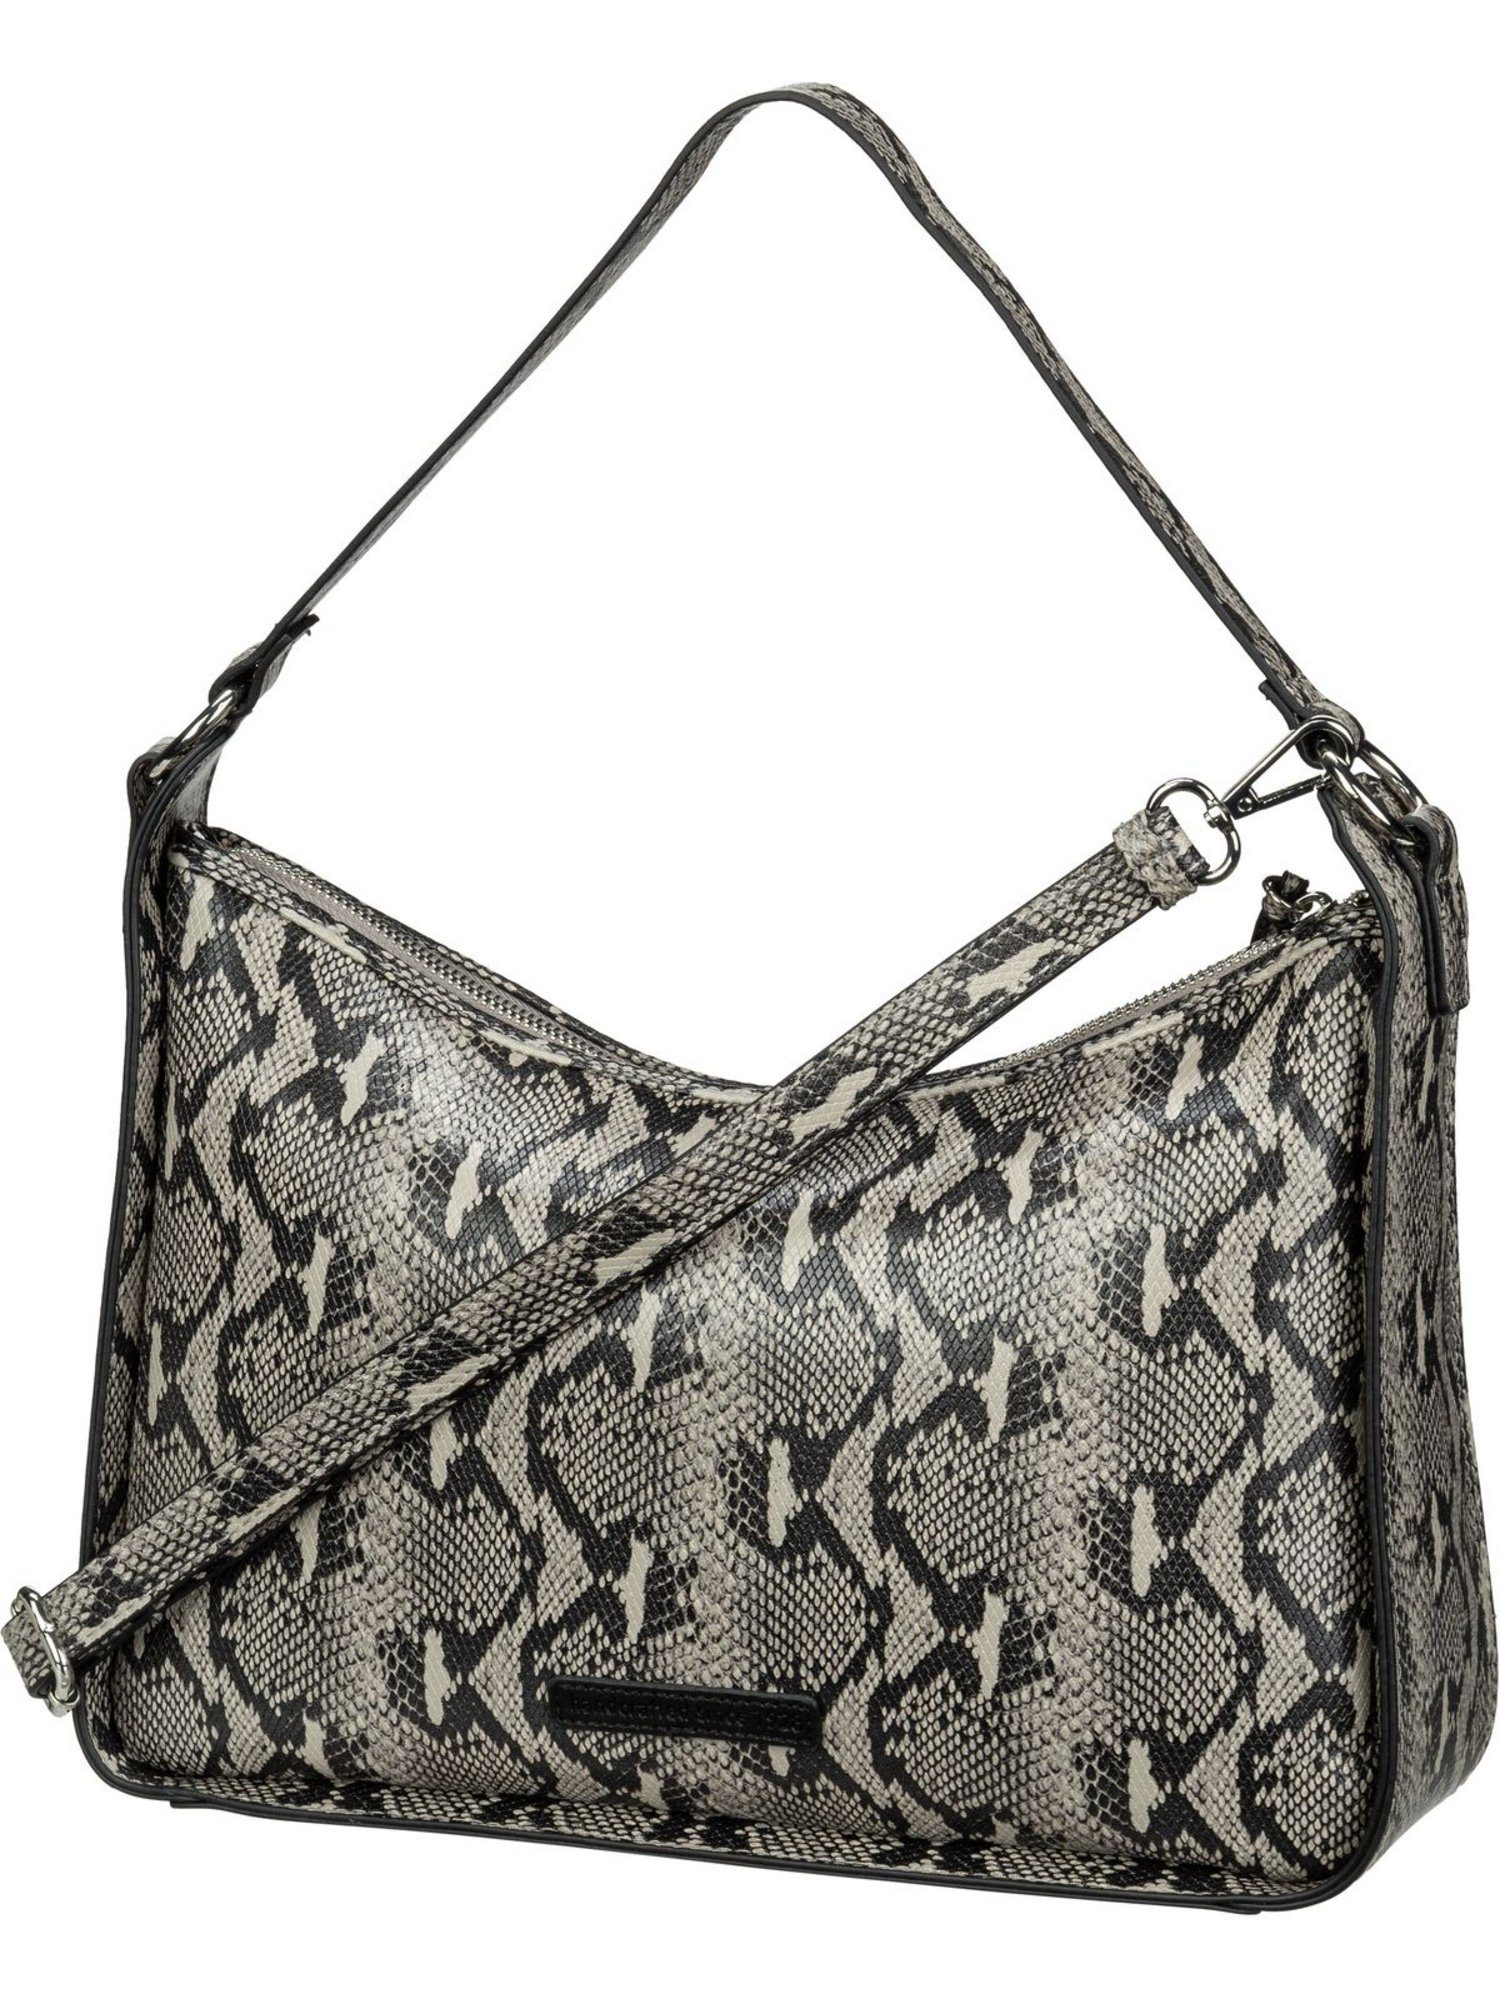 Picard Schultertasche Snake 3128 Forever